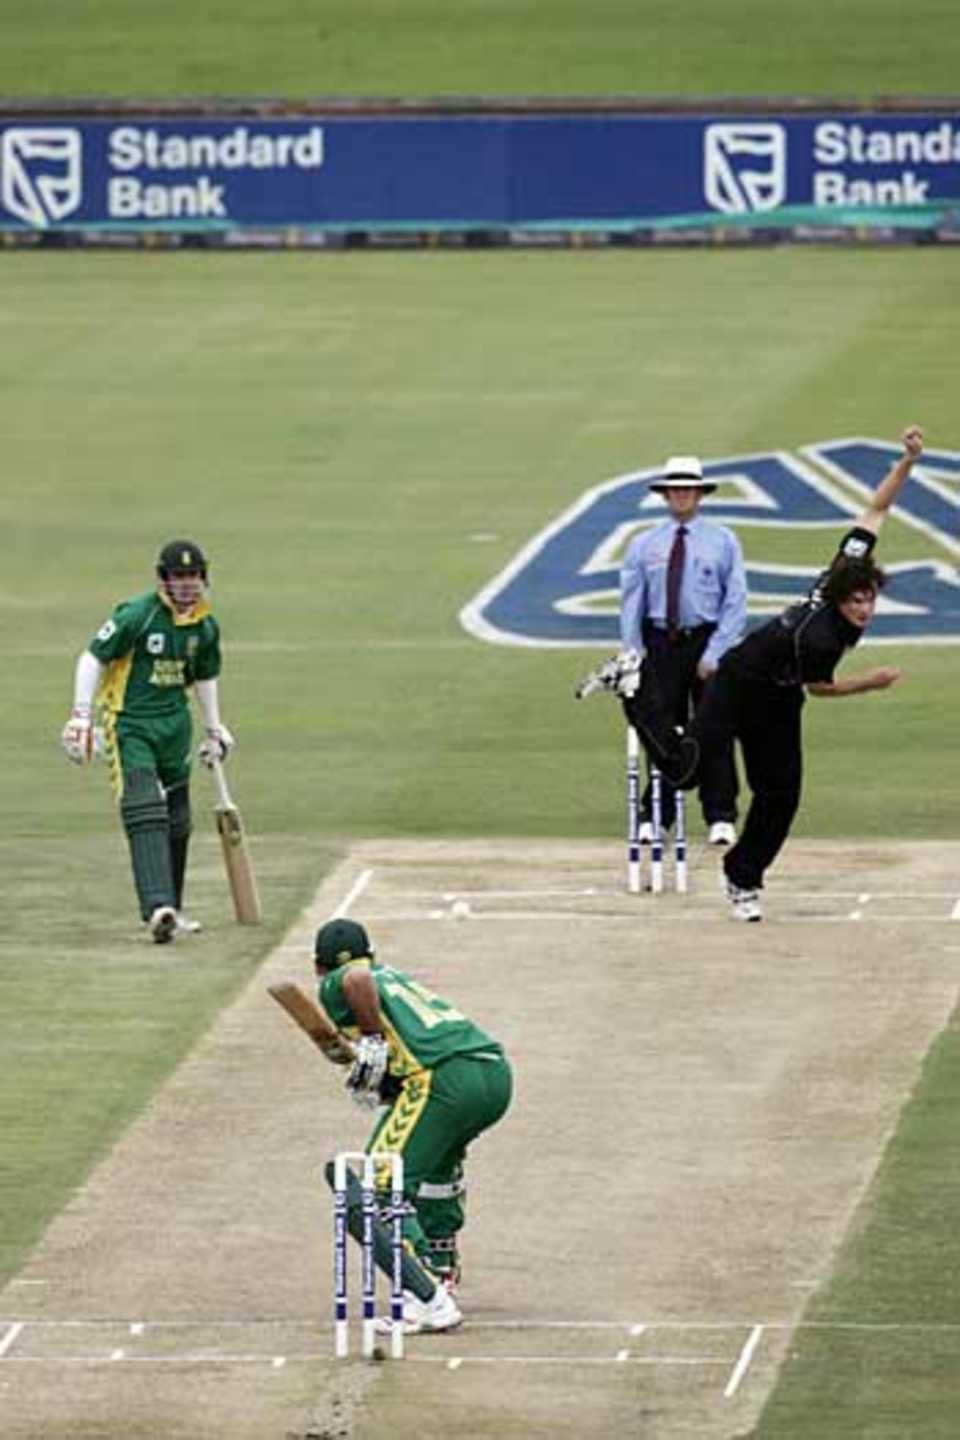 Kyle Mills bowls to Graeme Smith - Mills exchanged words with Smith, but Smith finished on top with 66, South Africa v New Zealand, 5th ODI, Centurion Park, November 6, 2005